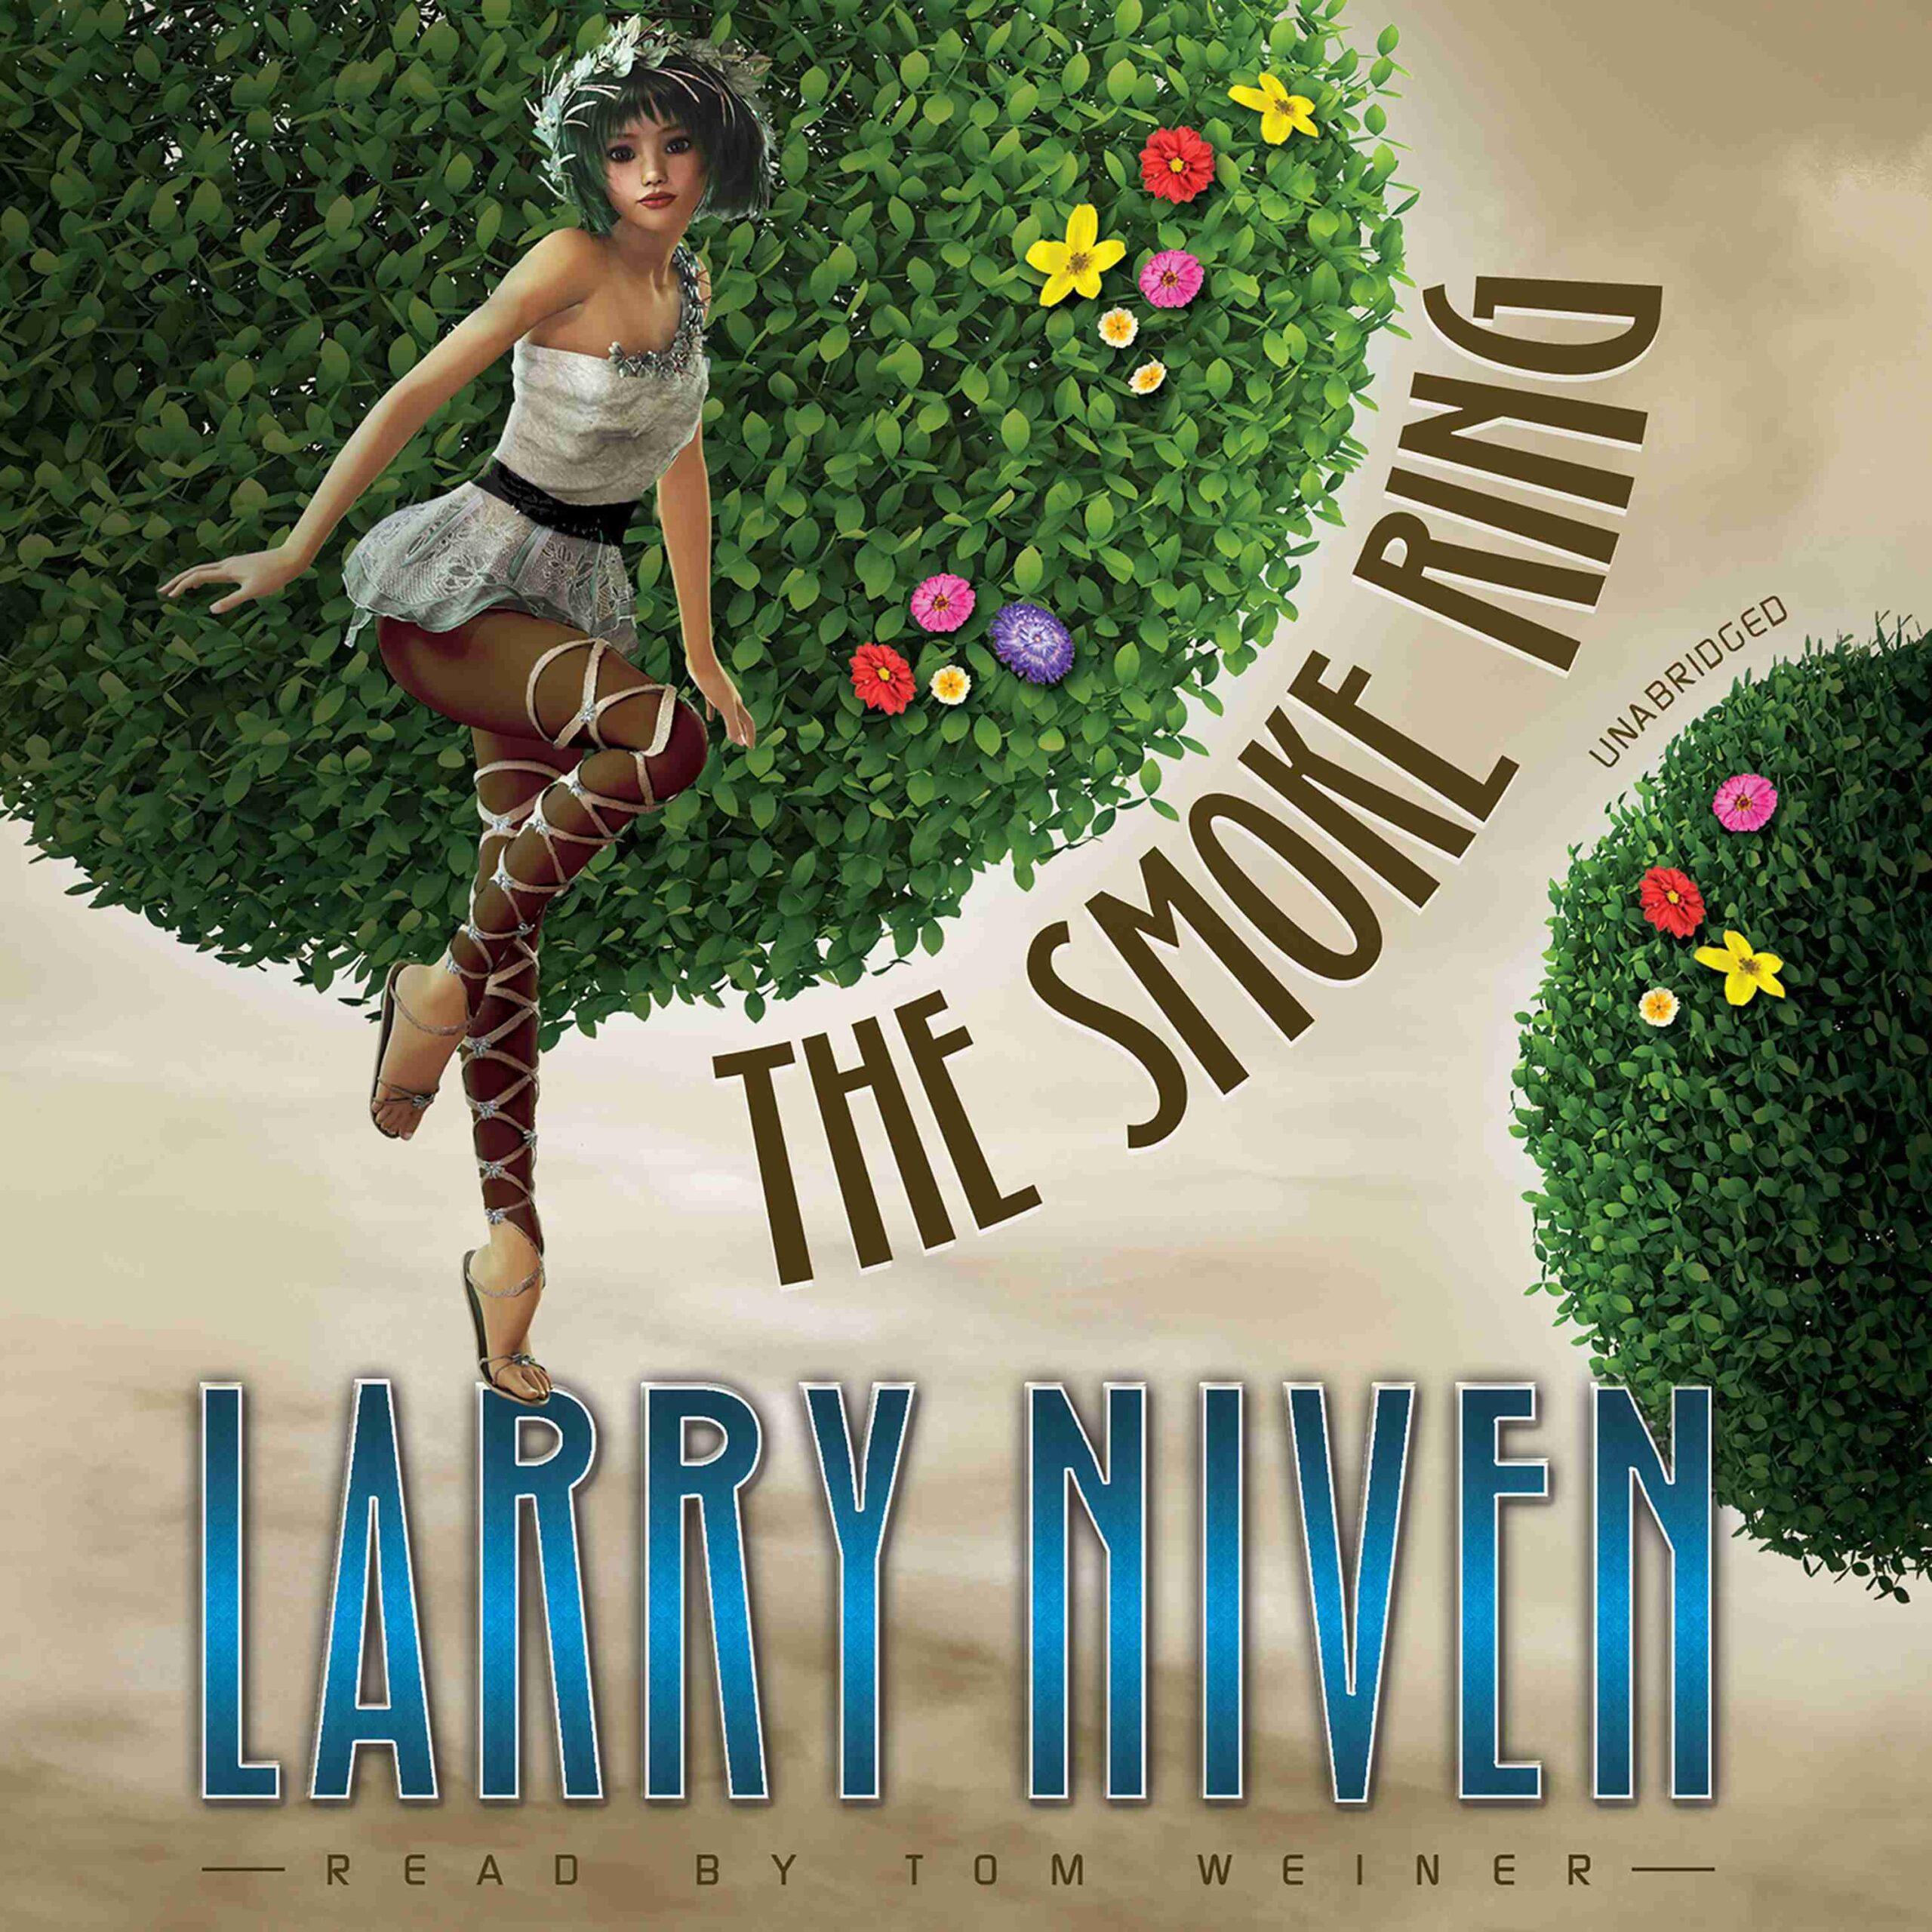 The Smoke Ring byLarry Niven Audiobook. 16.95 USD